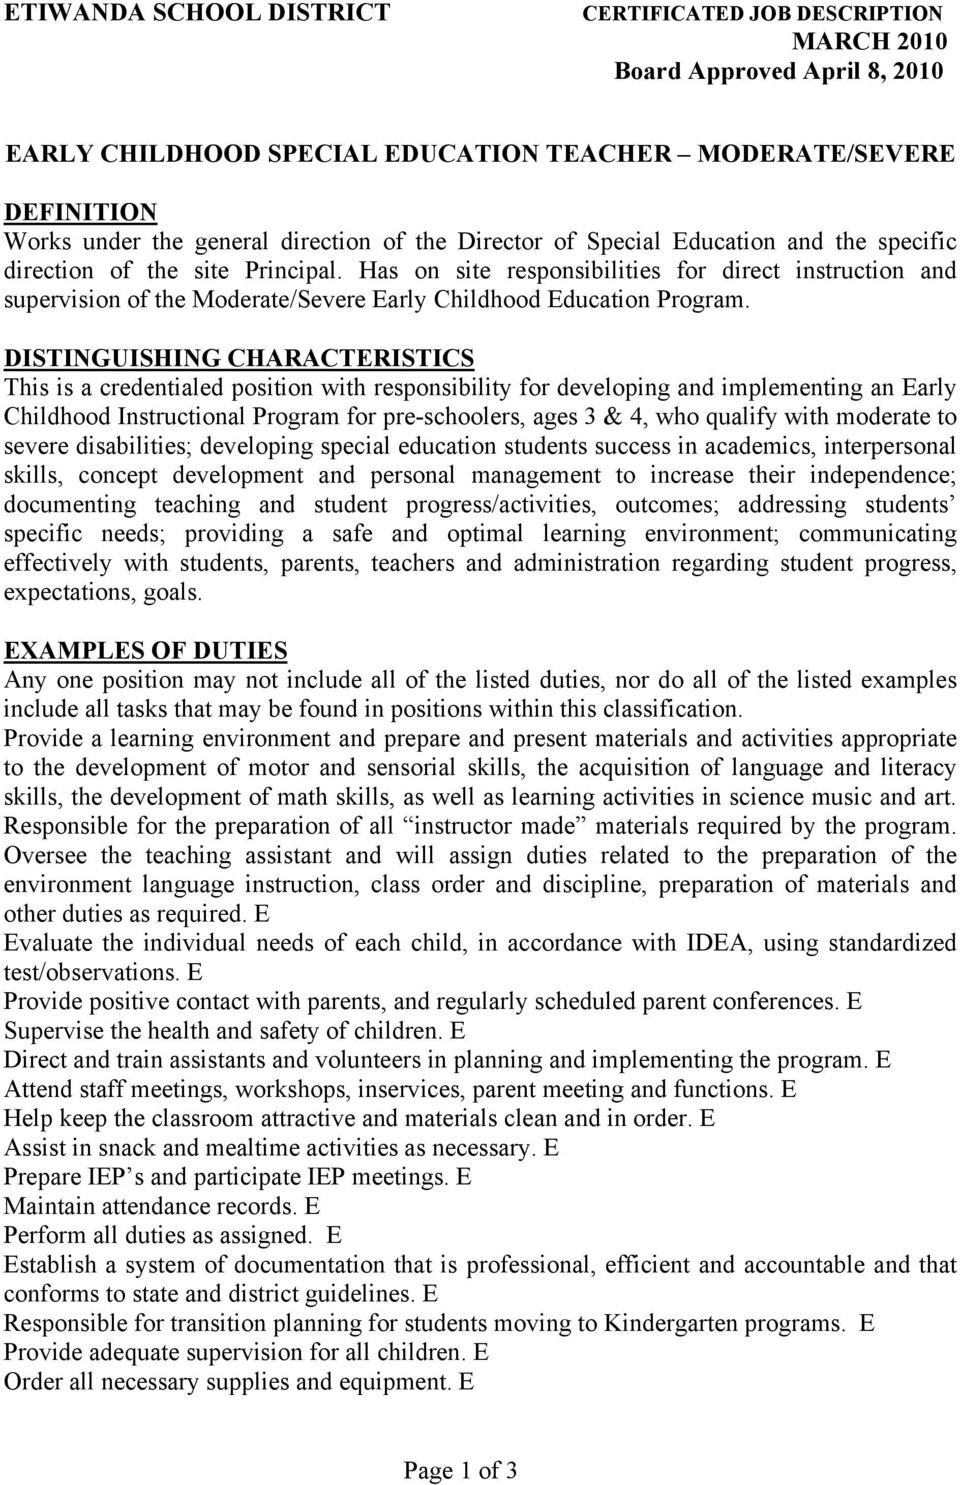 DISTINGUISHING CHARACTERISTICS This is a credentialed position with responsibility for developing and implementing an Early Childhood Instructional Program for pre-schoolers, ages 3 & 4, who qualify